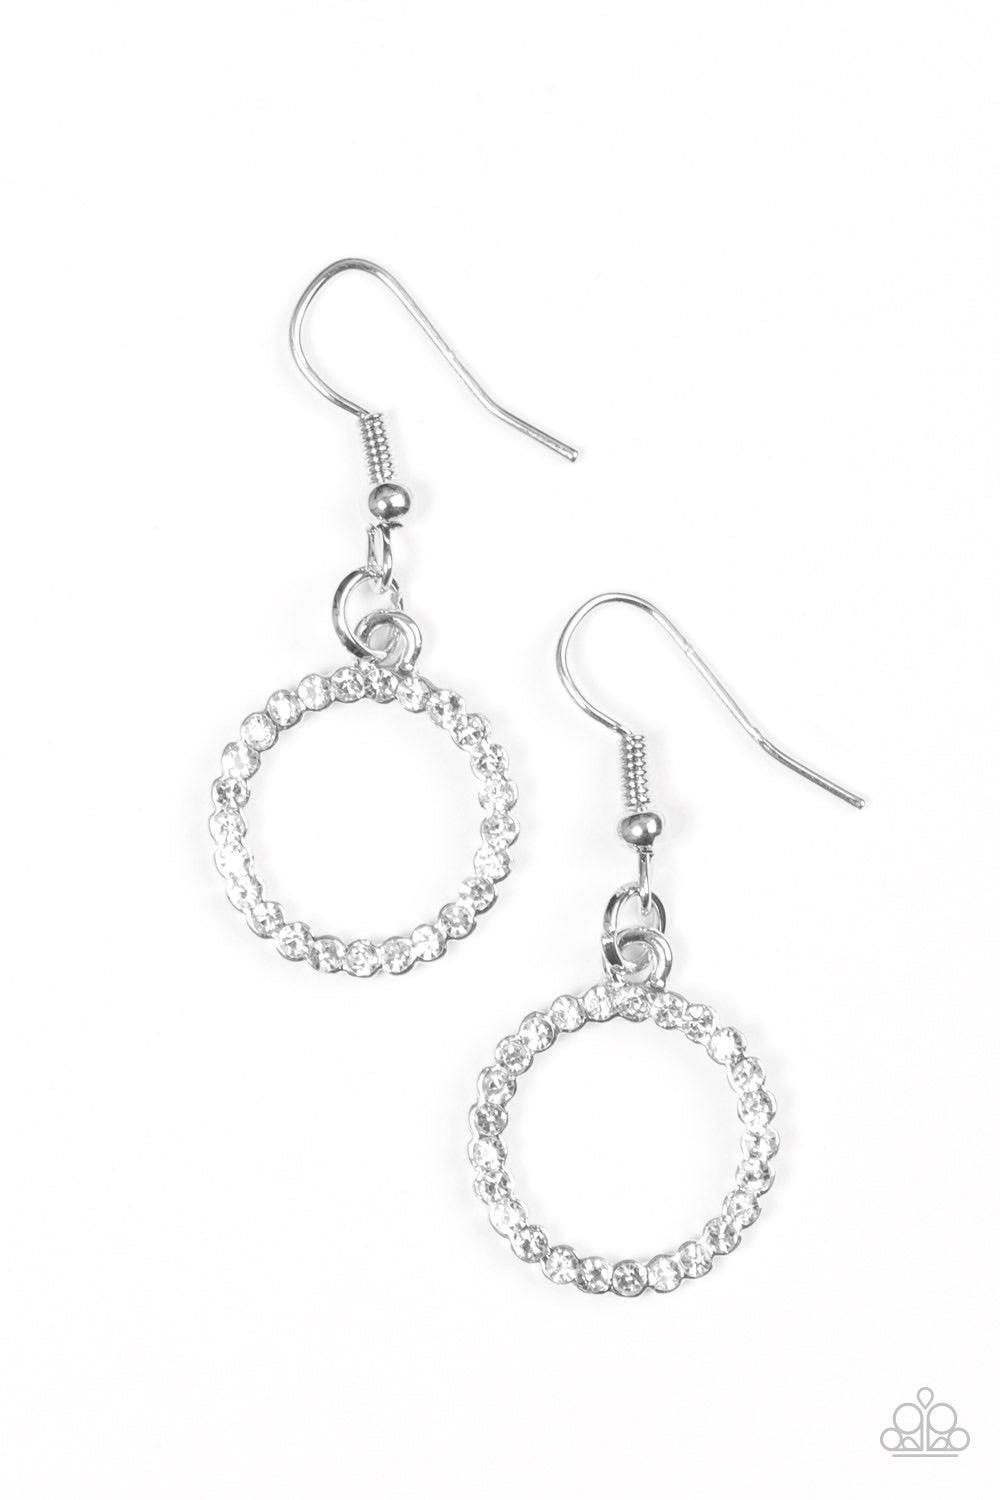 Paparazzi Accessories Runway Glam - White Glittery white rhinestones are encrusted along a dainty silver hoop, creating a refined lure. Earring attaches to a standard fishhook fitting. Jewelry